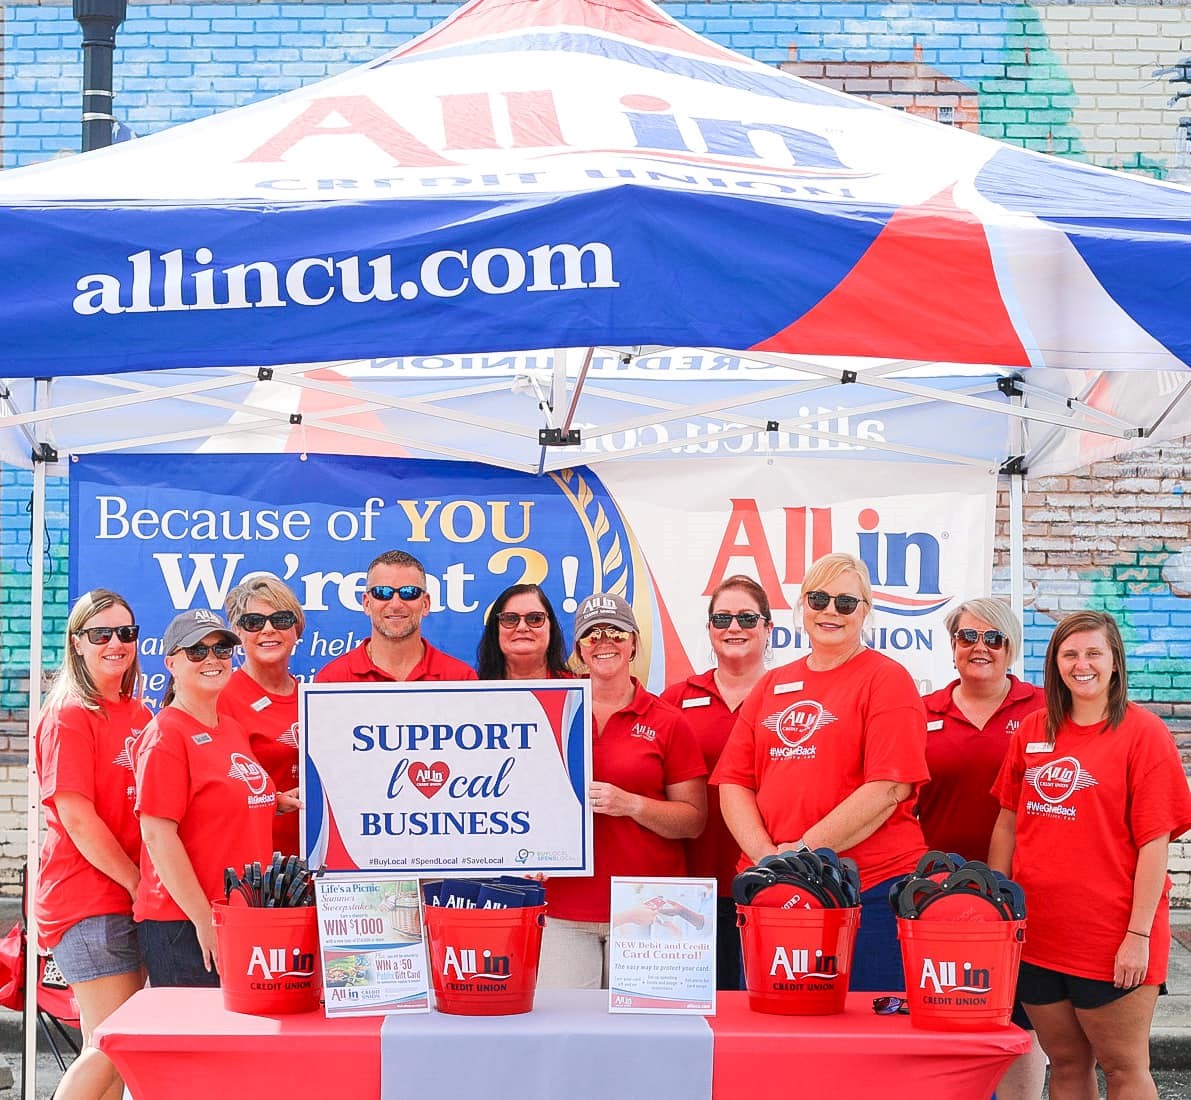 All In Credit Union Employees Set Record for Volunteer Hours